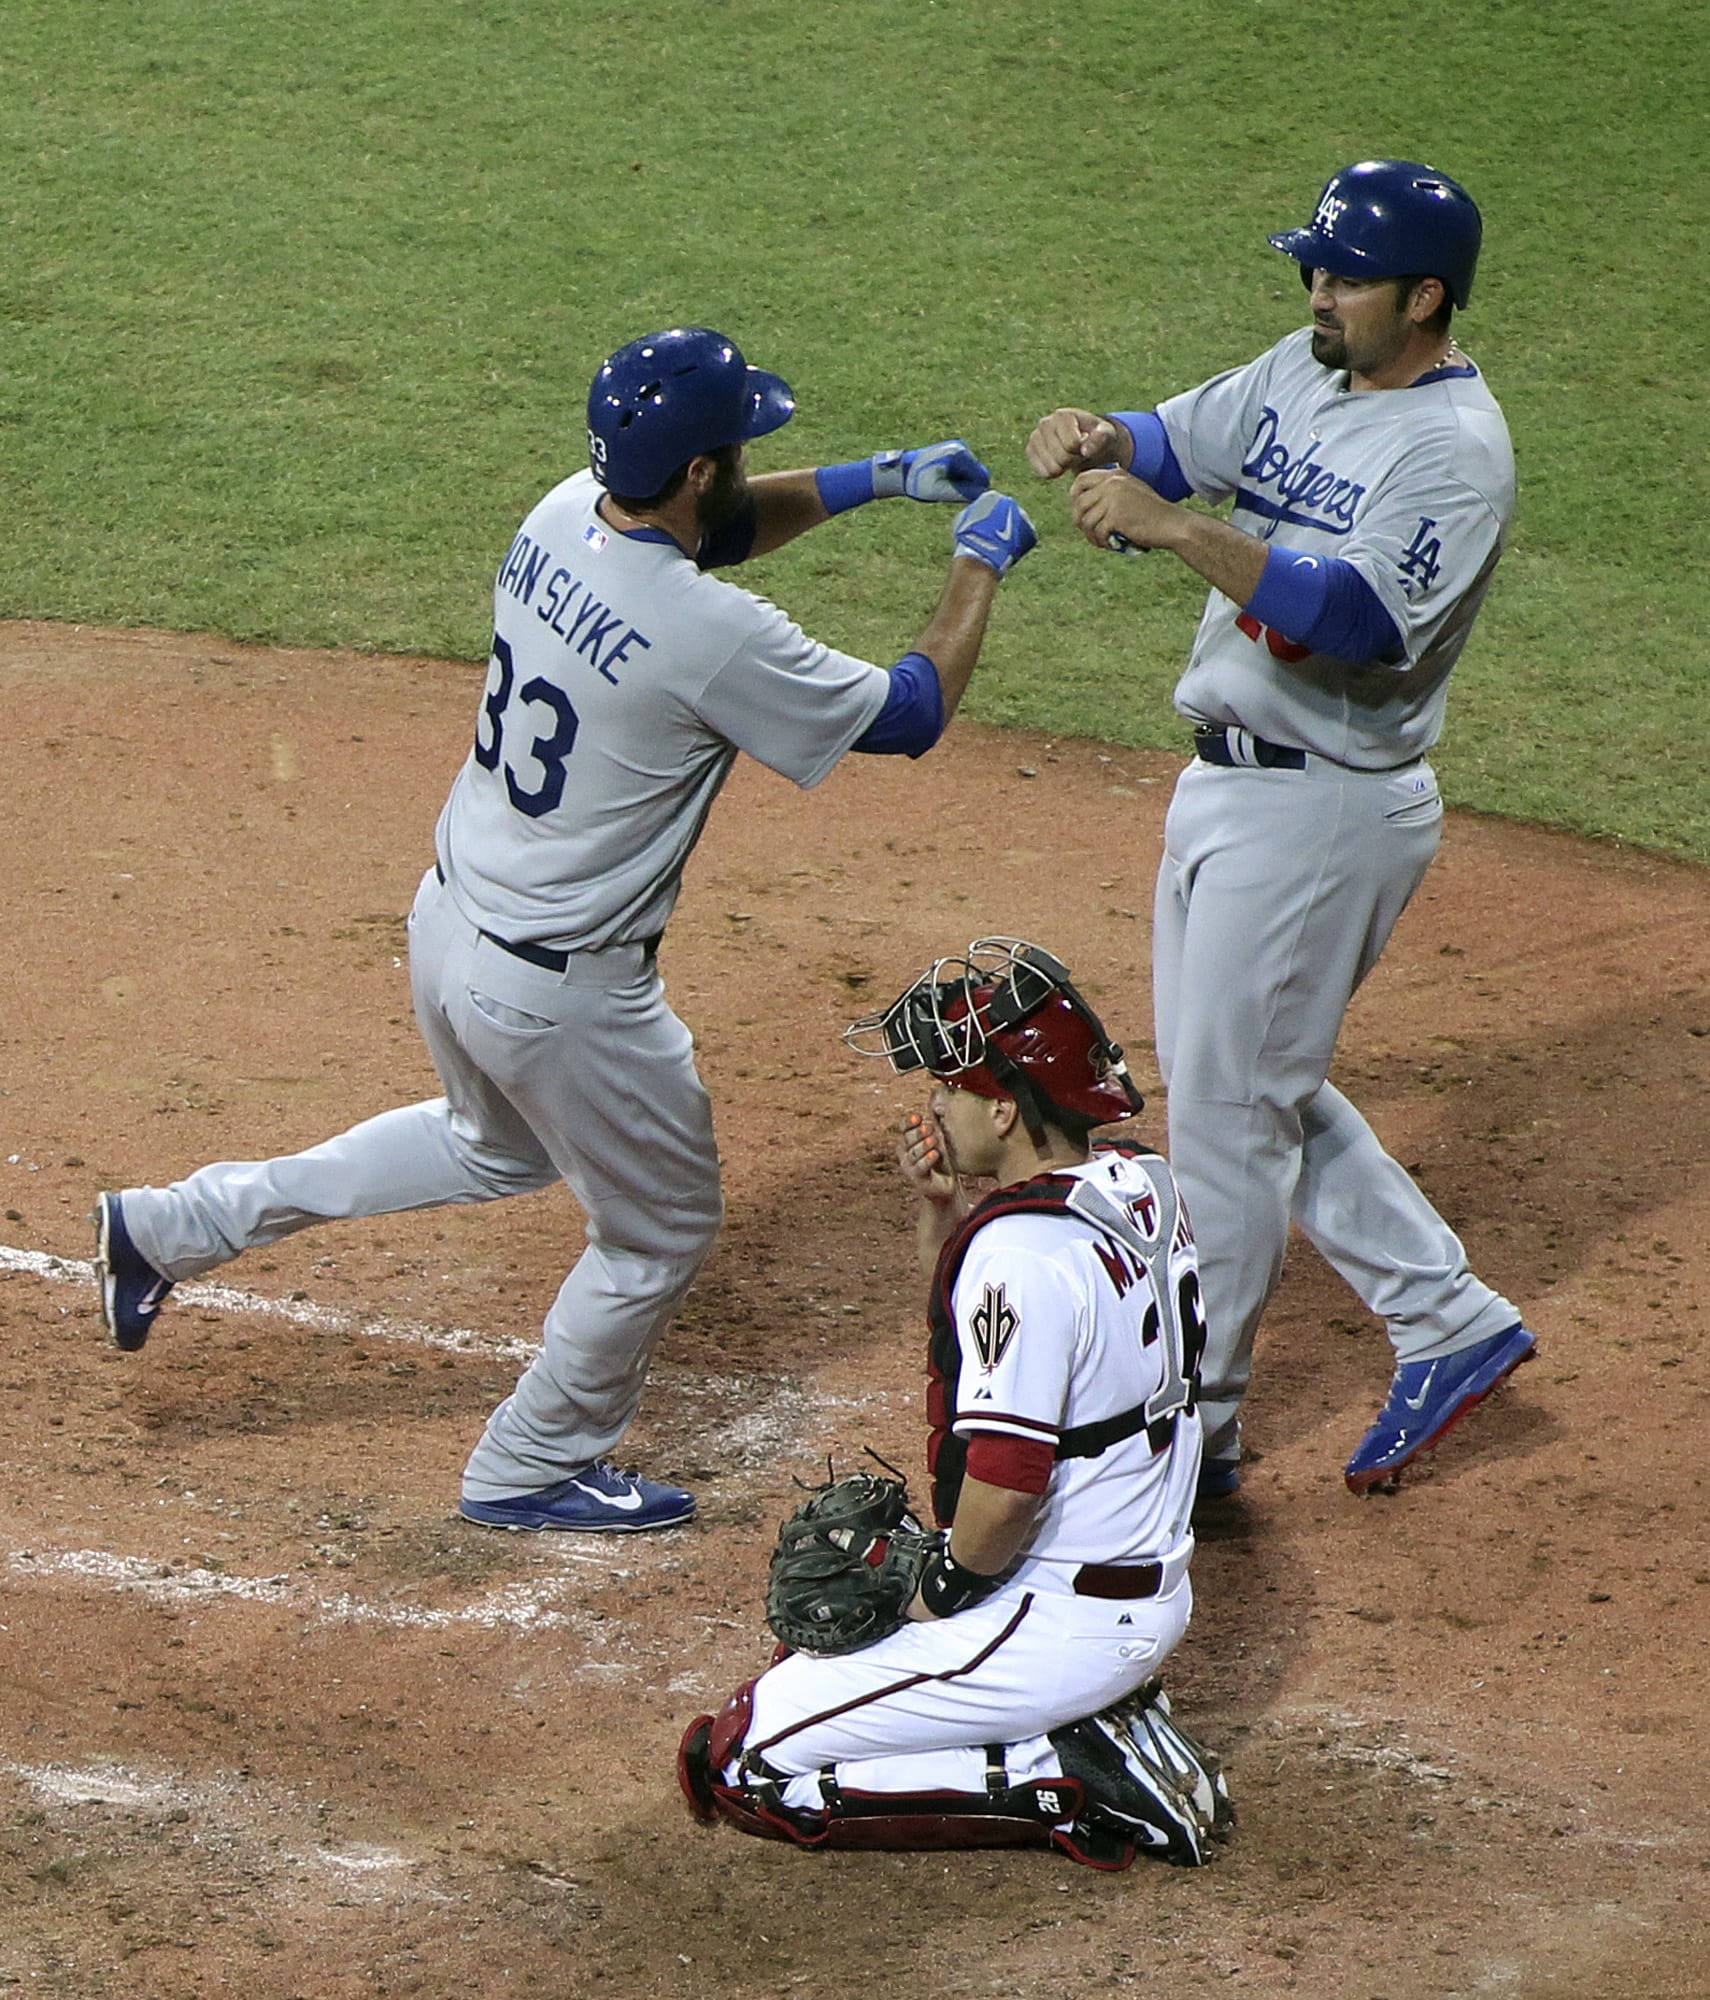 Diamondbacks' catcher Miguel Montero kneels as the Dodgers' Scott Van Slyke, left, is congratulated by teammate Adrian Gonzalez, right, after Van Slyke hit a two-run home run in the Major League Baseball opening game between the Los Angeles Dodgers and Arizona Diamondbacks at the Sydney Cricket Ground in Sydney, Australia Saturday, March 22, 2014.   The Dodgers won the game 3-1.